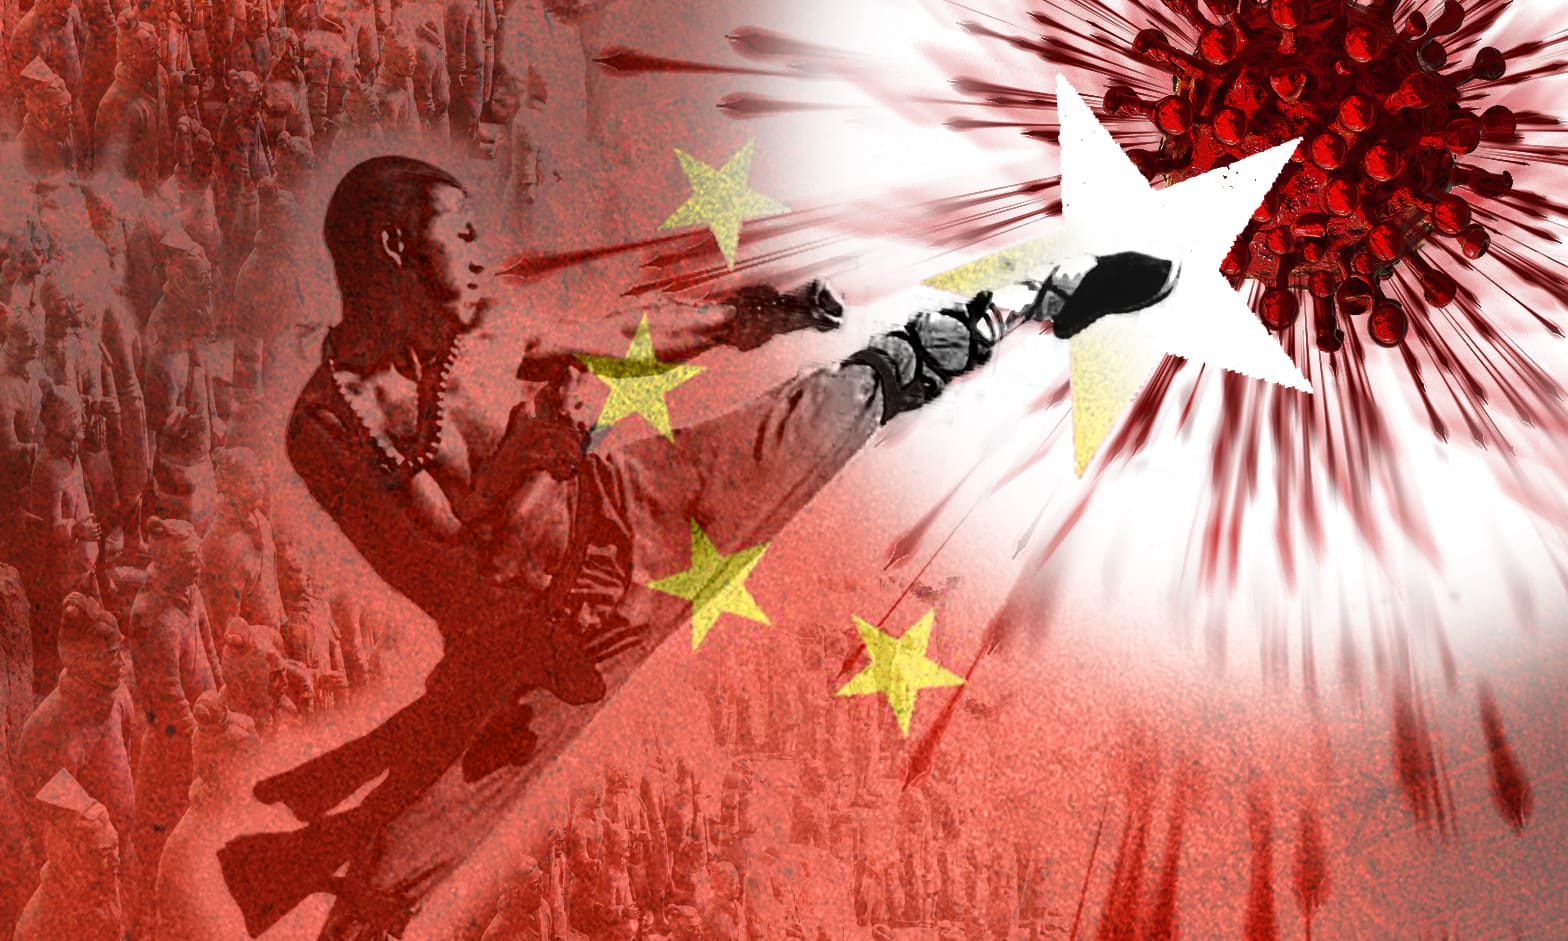 Article Header Design: “How China Could Win the War against the Covid-19 Pandemic”